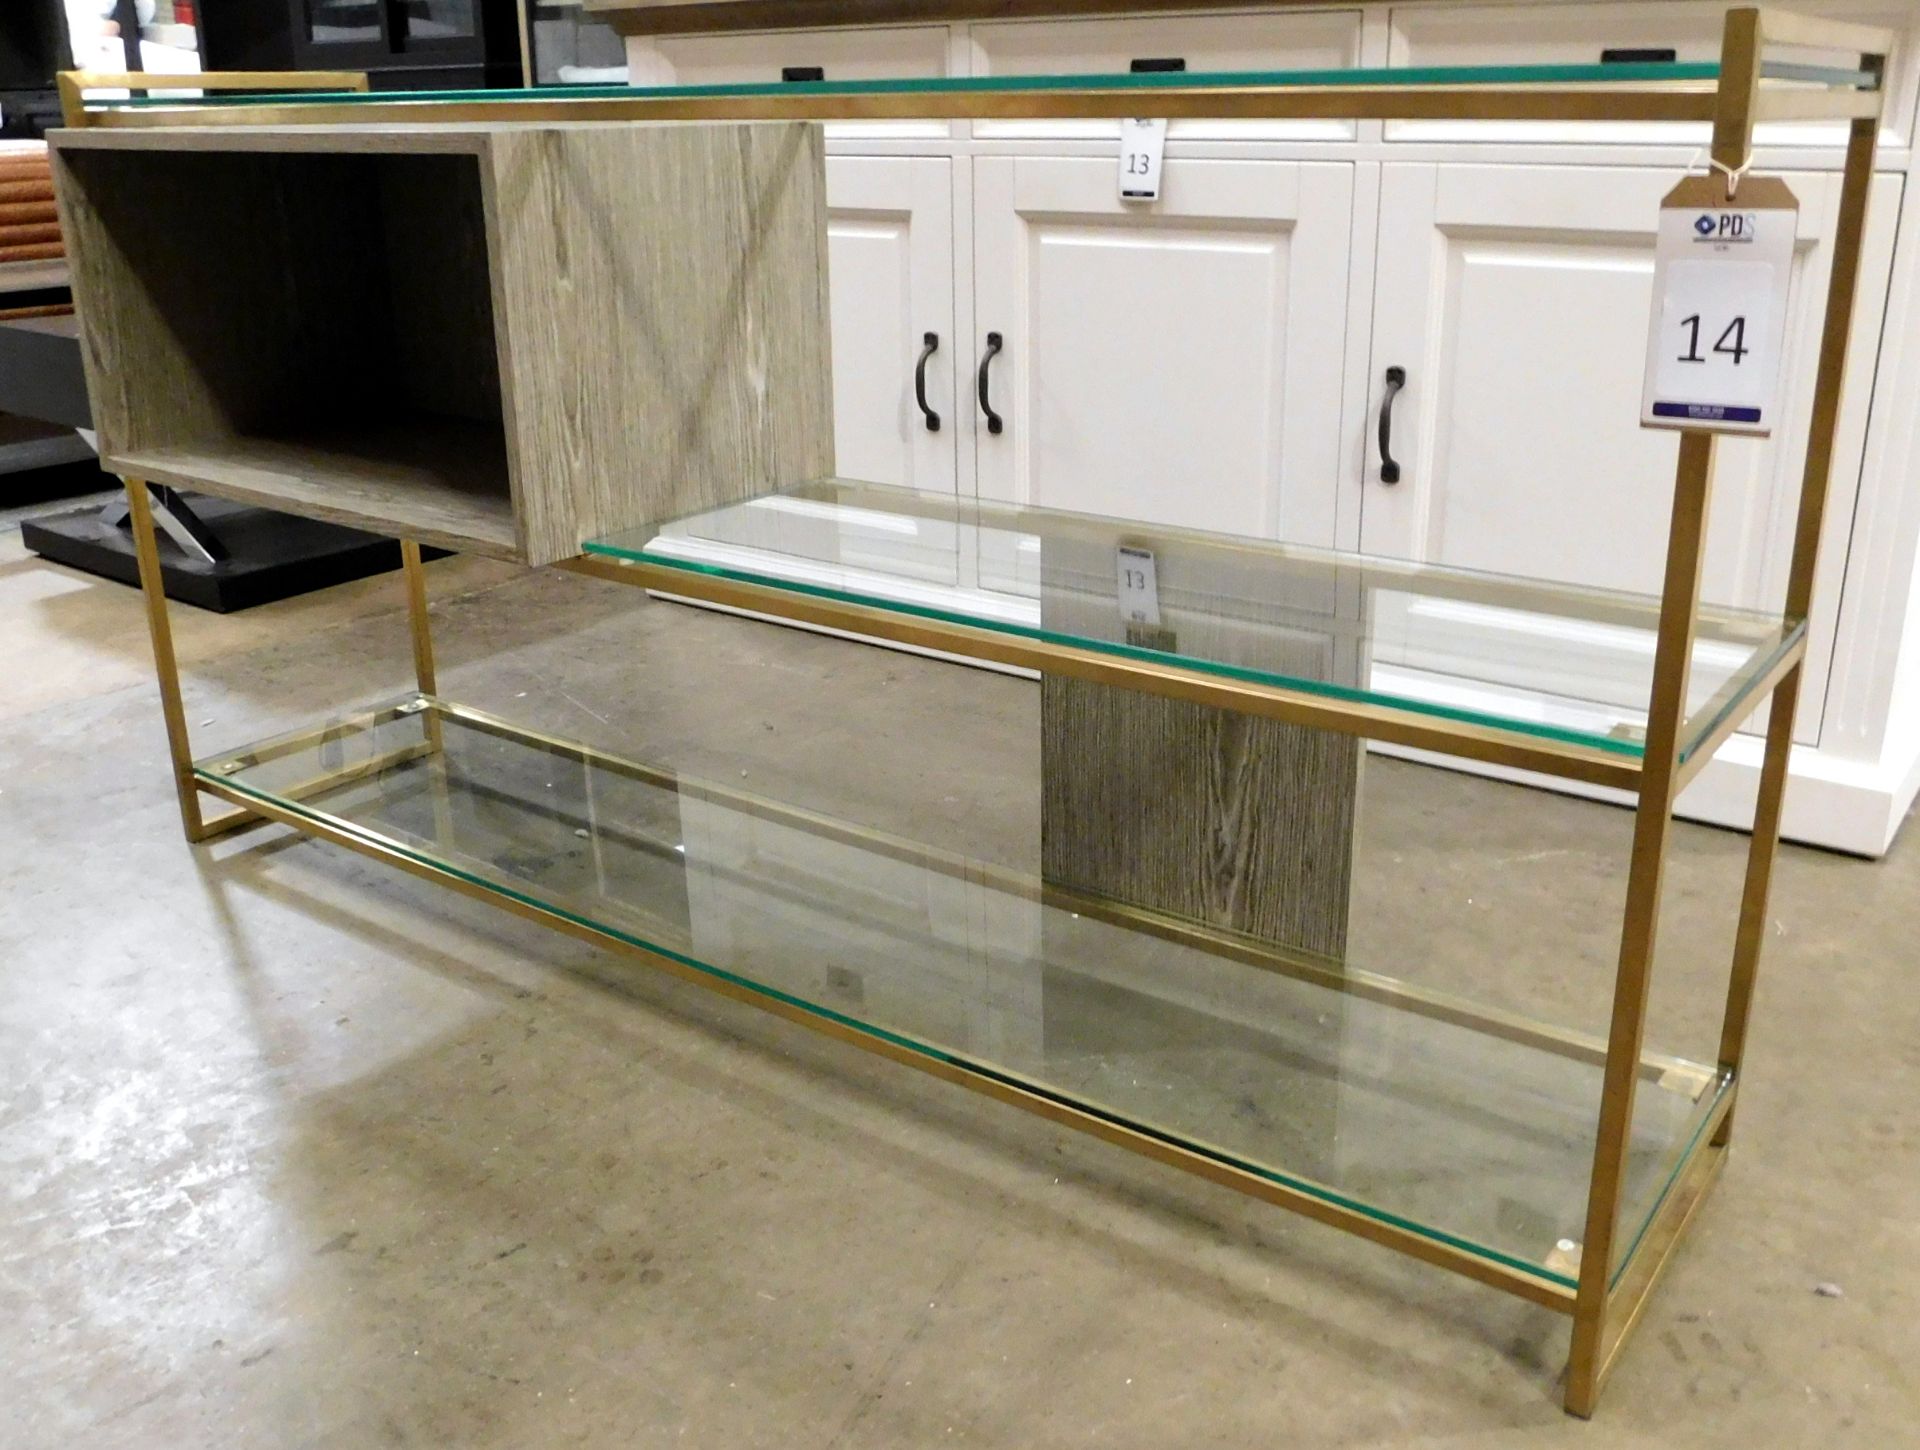 Gilmore Space Brass Effect Framed Console Unit Fitted 3 Plate Glass Shelves (Approximate Retail £